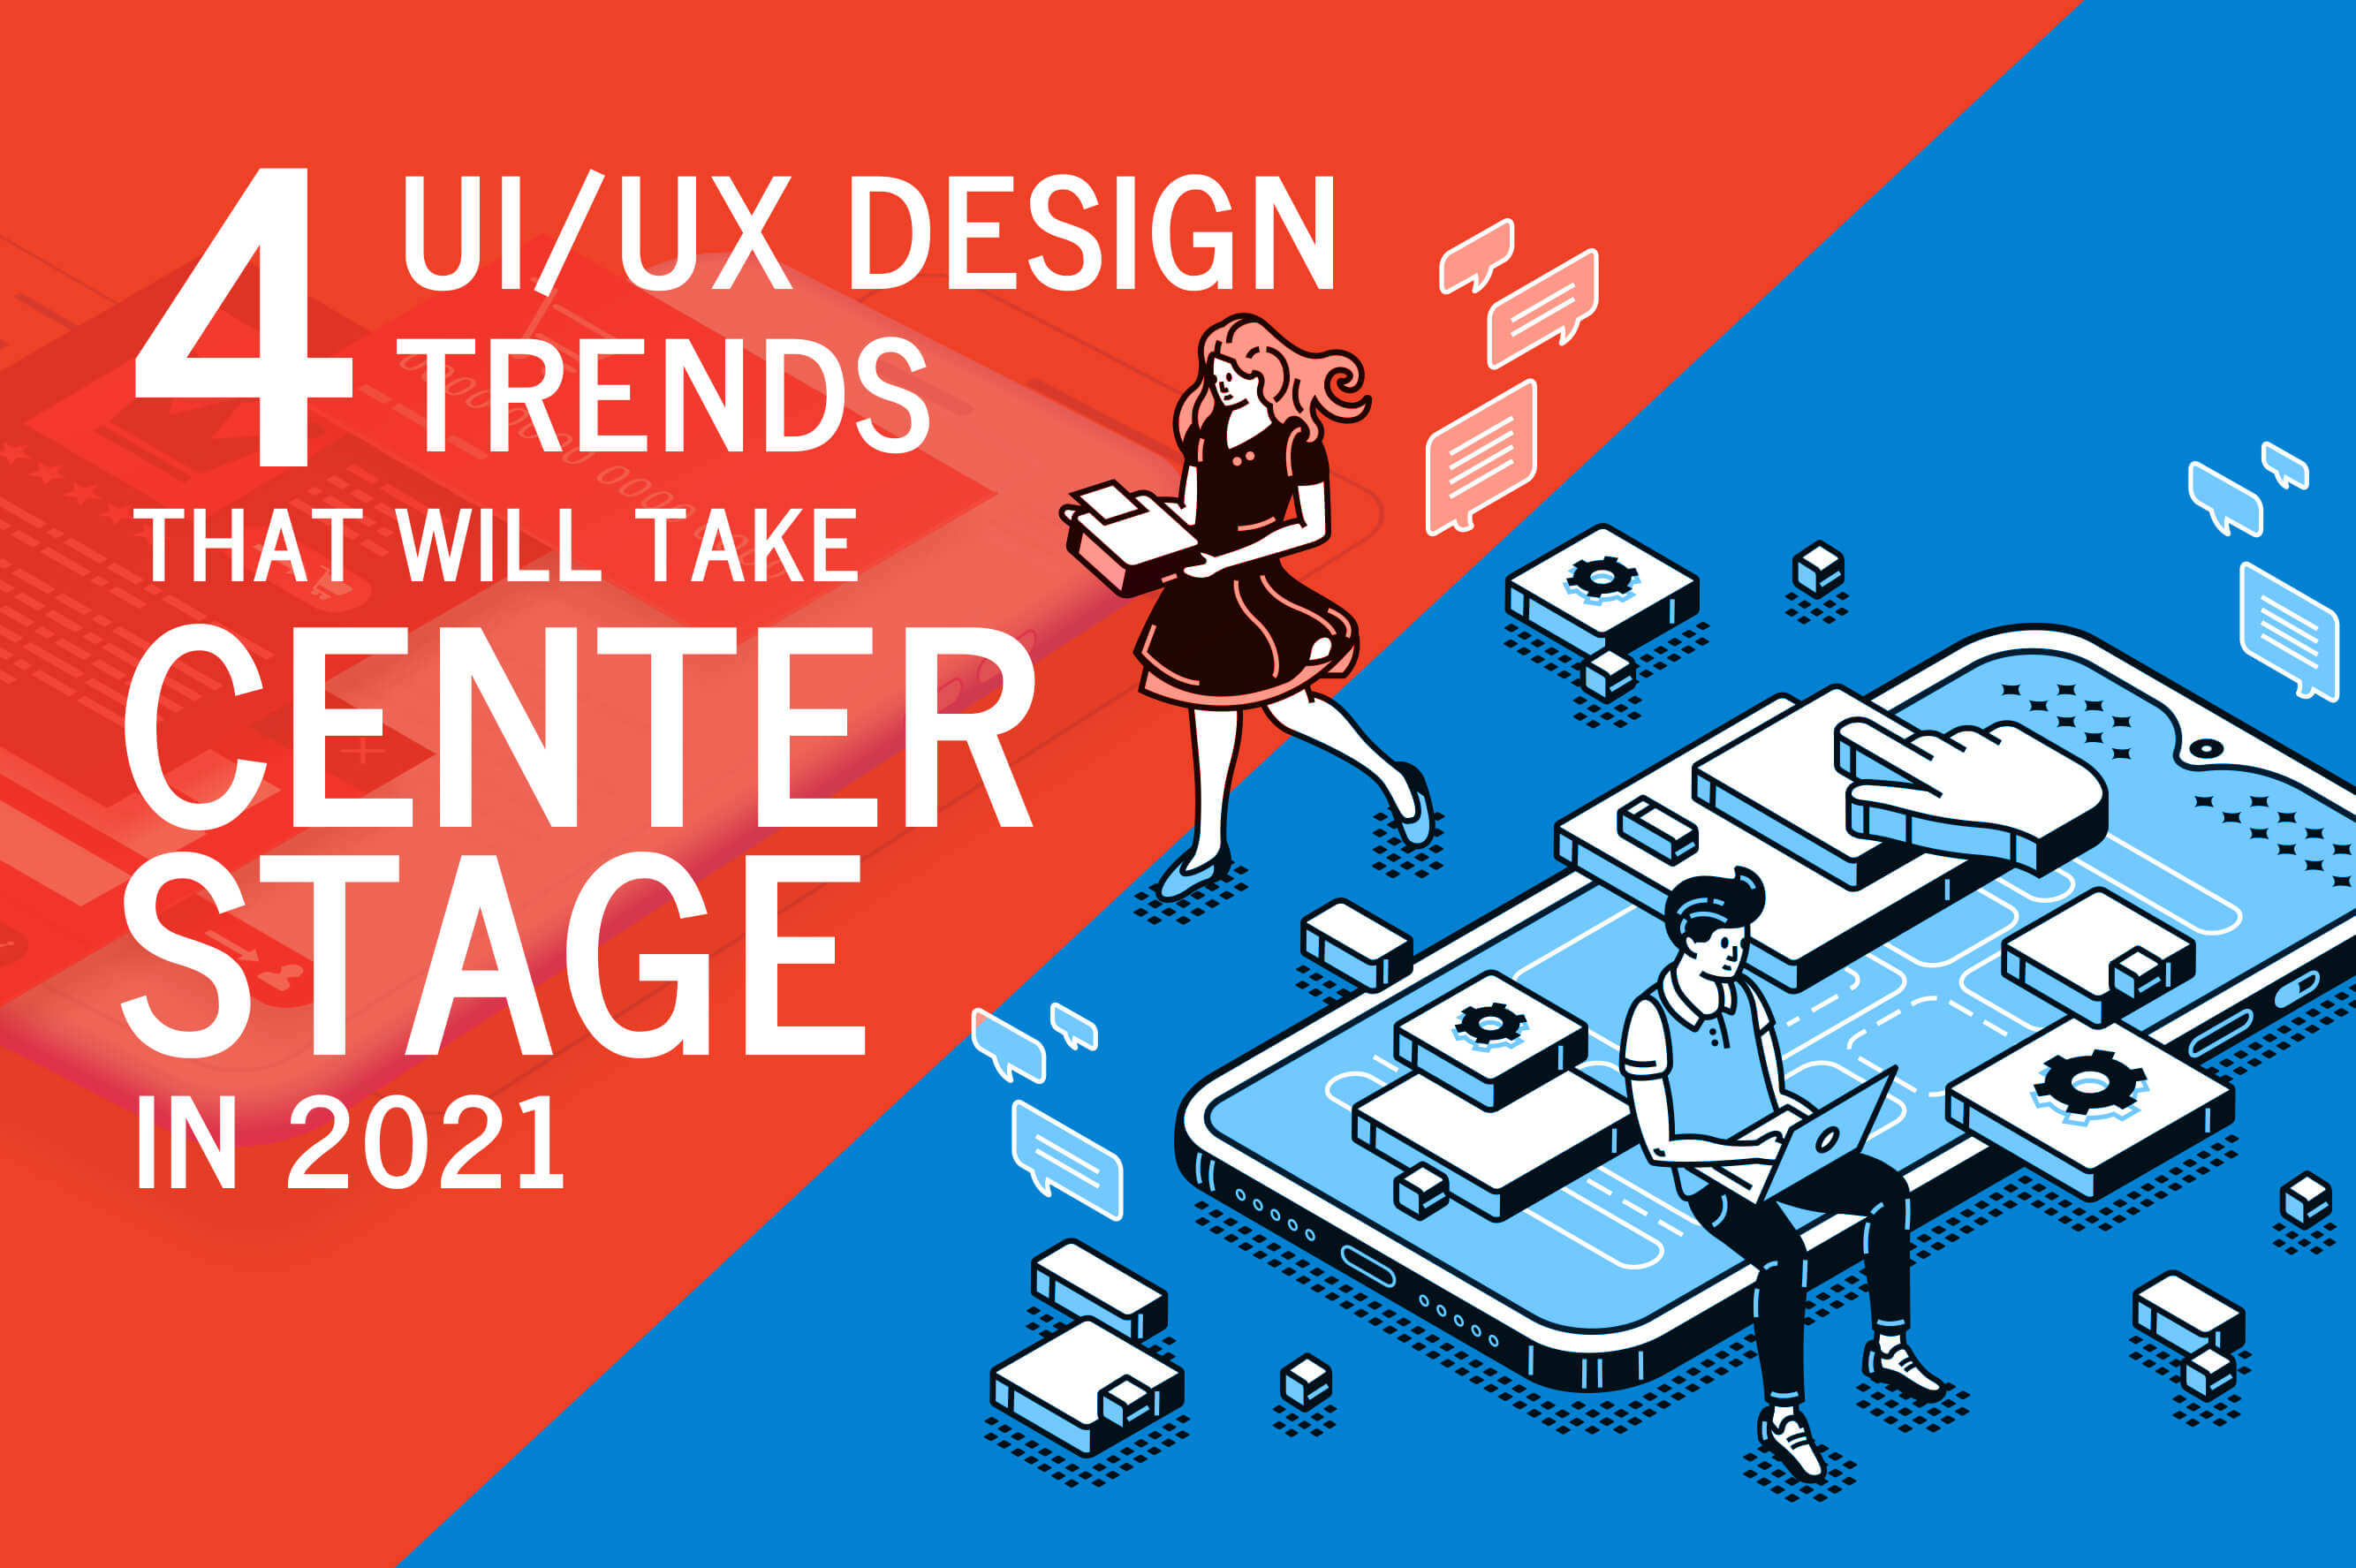 5 UI UX Design Trends That Will Take Center Stage in 2021